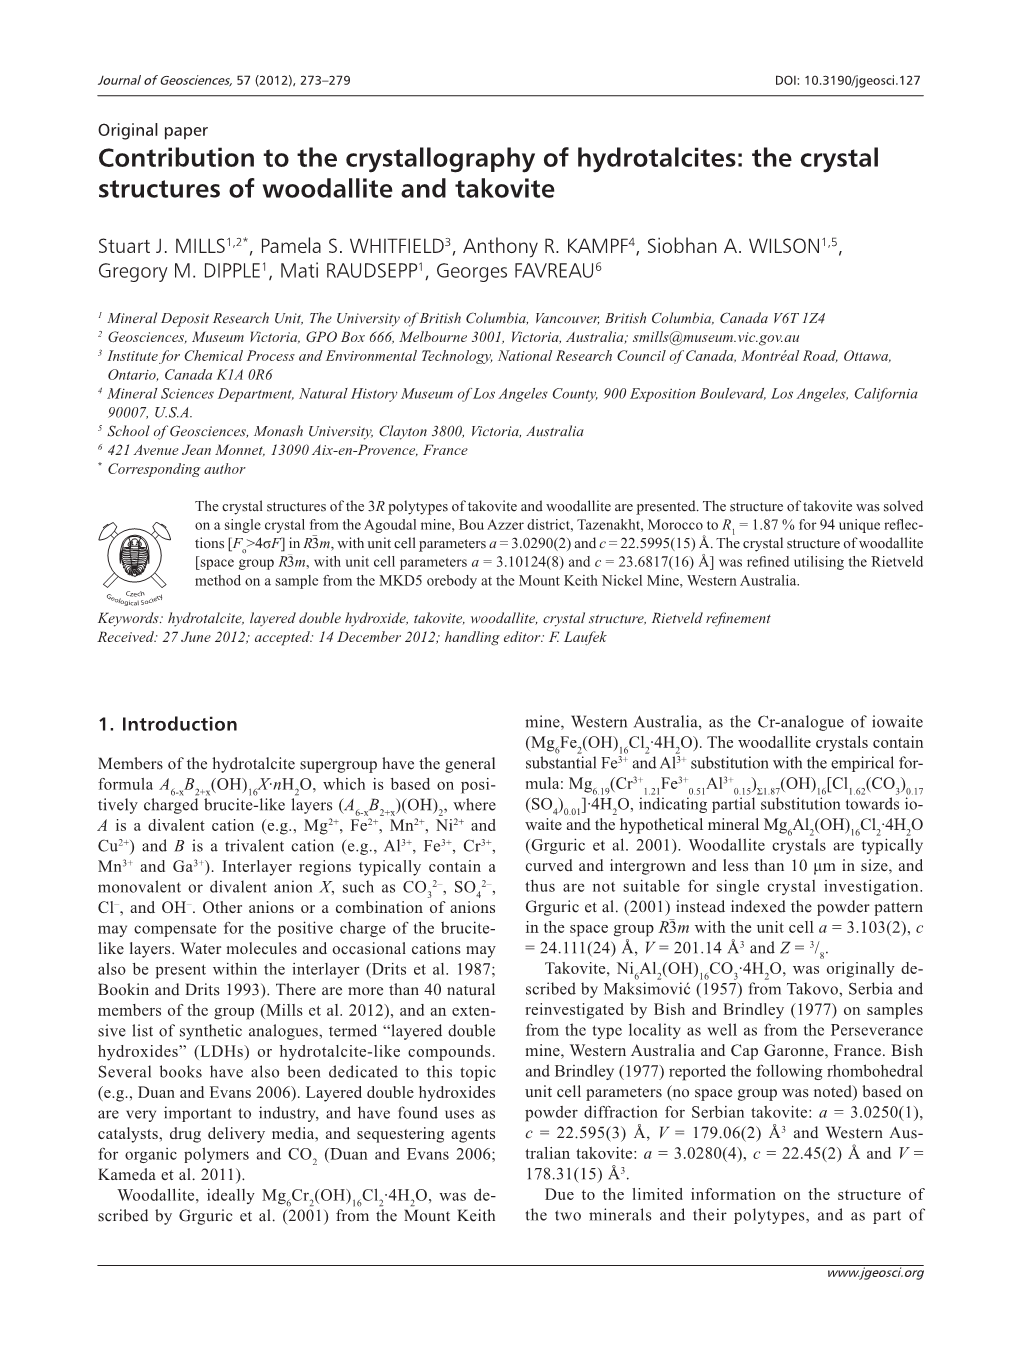 Contribution to the Crystallography of Hydrotalcites: the Crystal Structures of Woodallite and Takovite